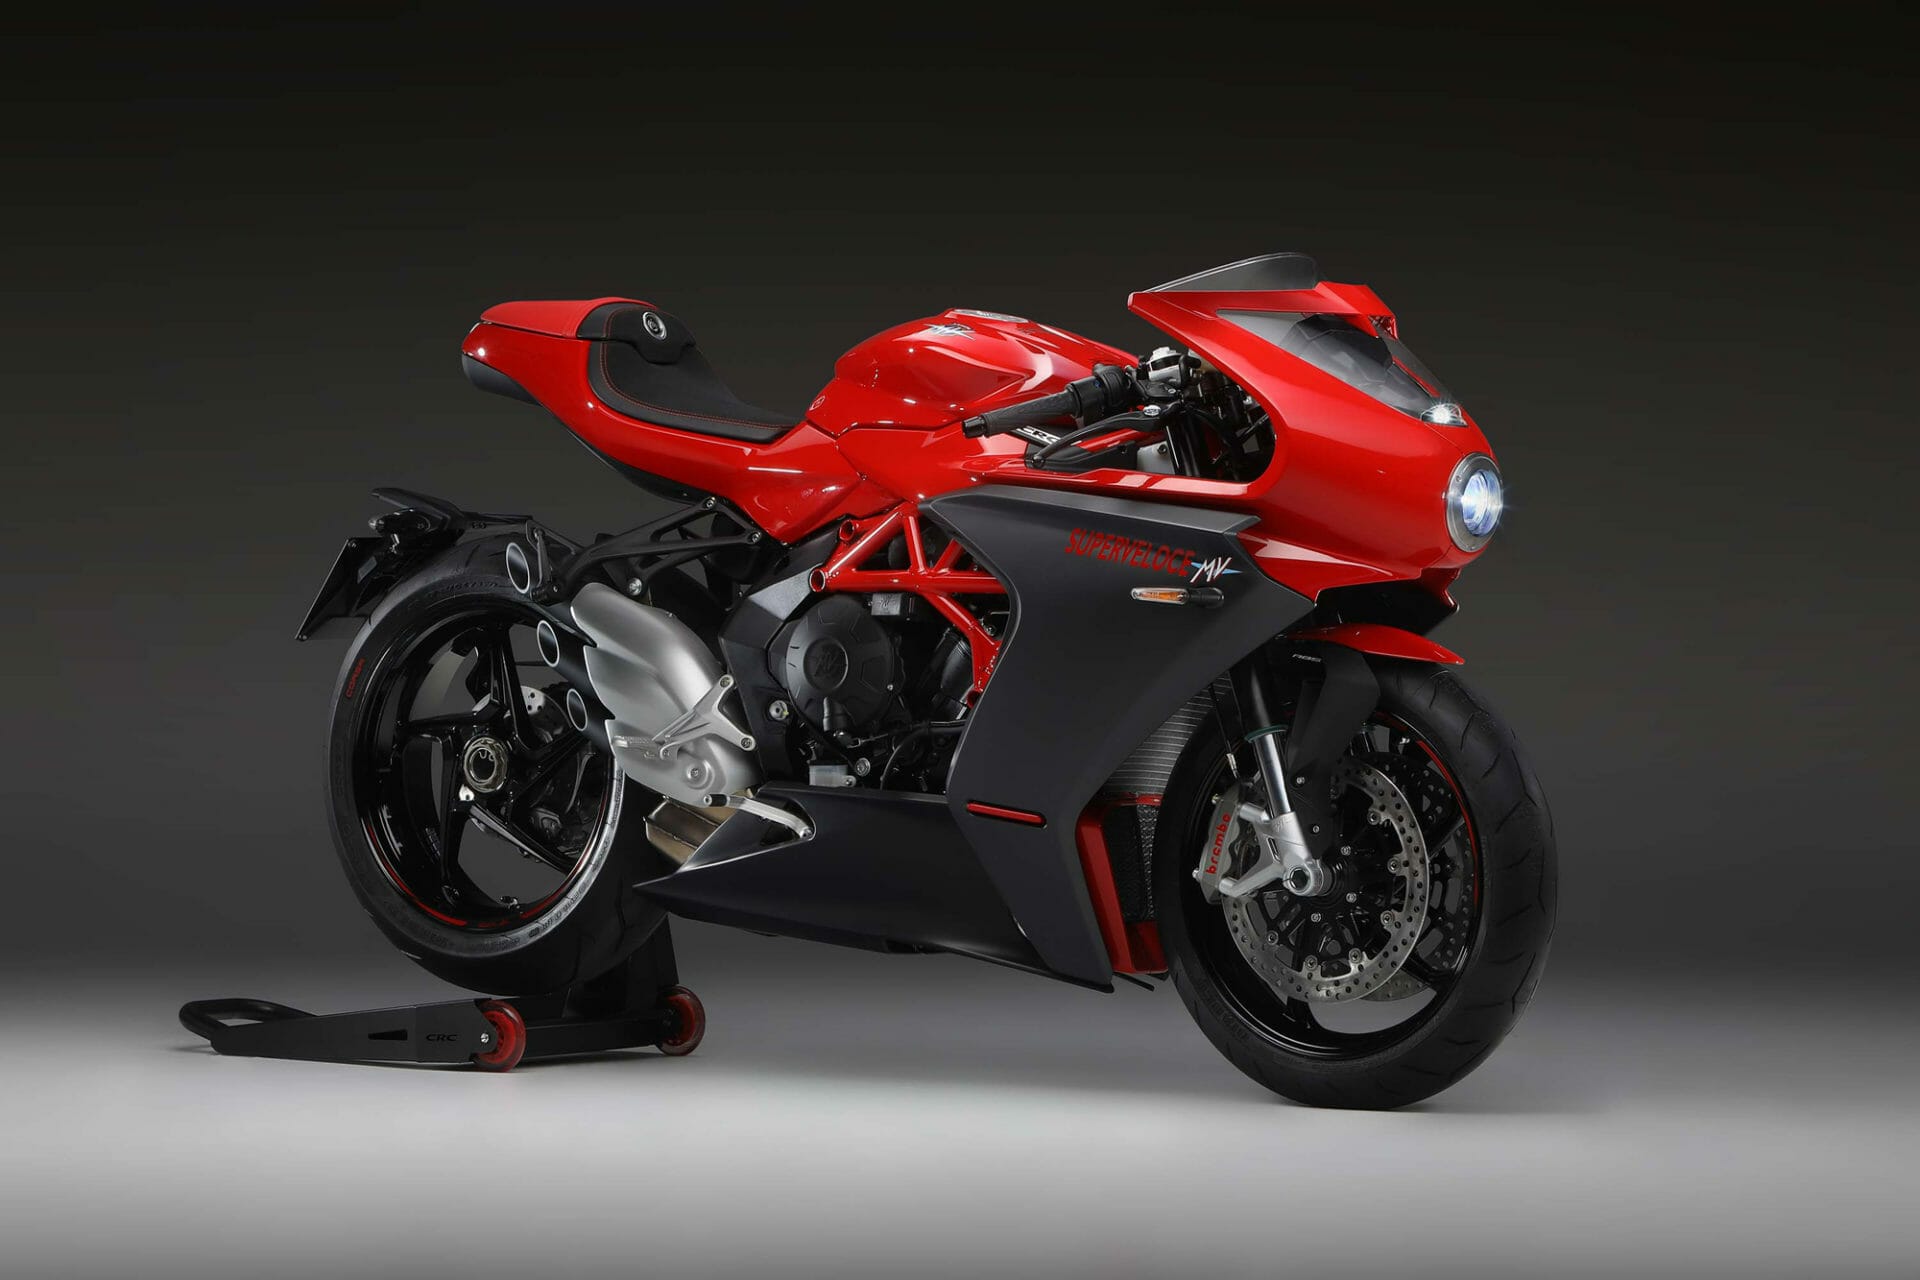 #MVAgusta #Superveloce800 Rosso
- also in the app Motorcycle News